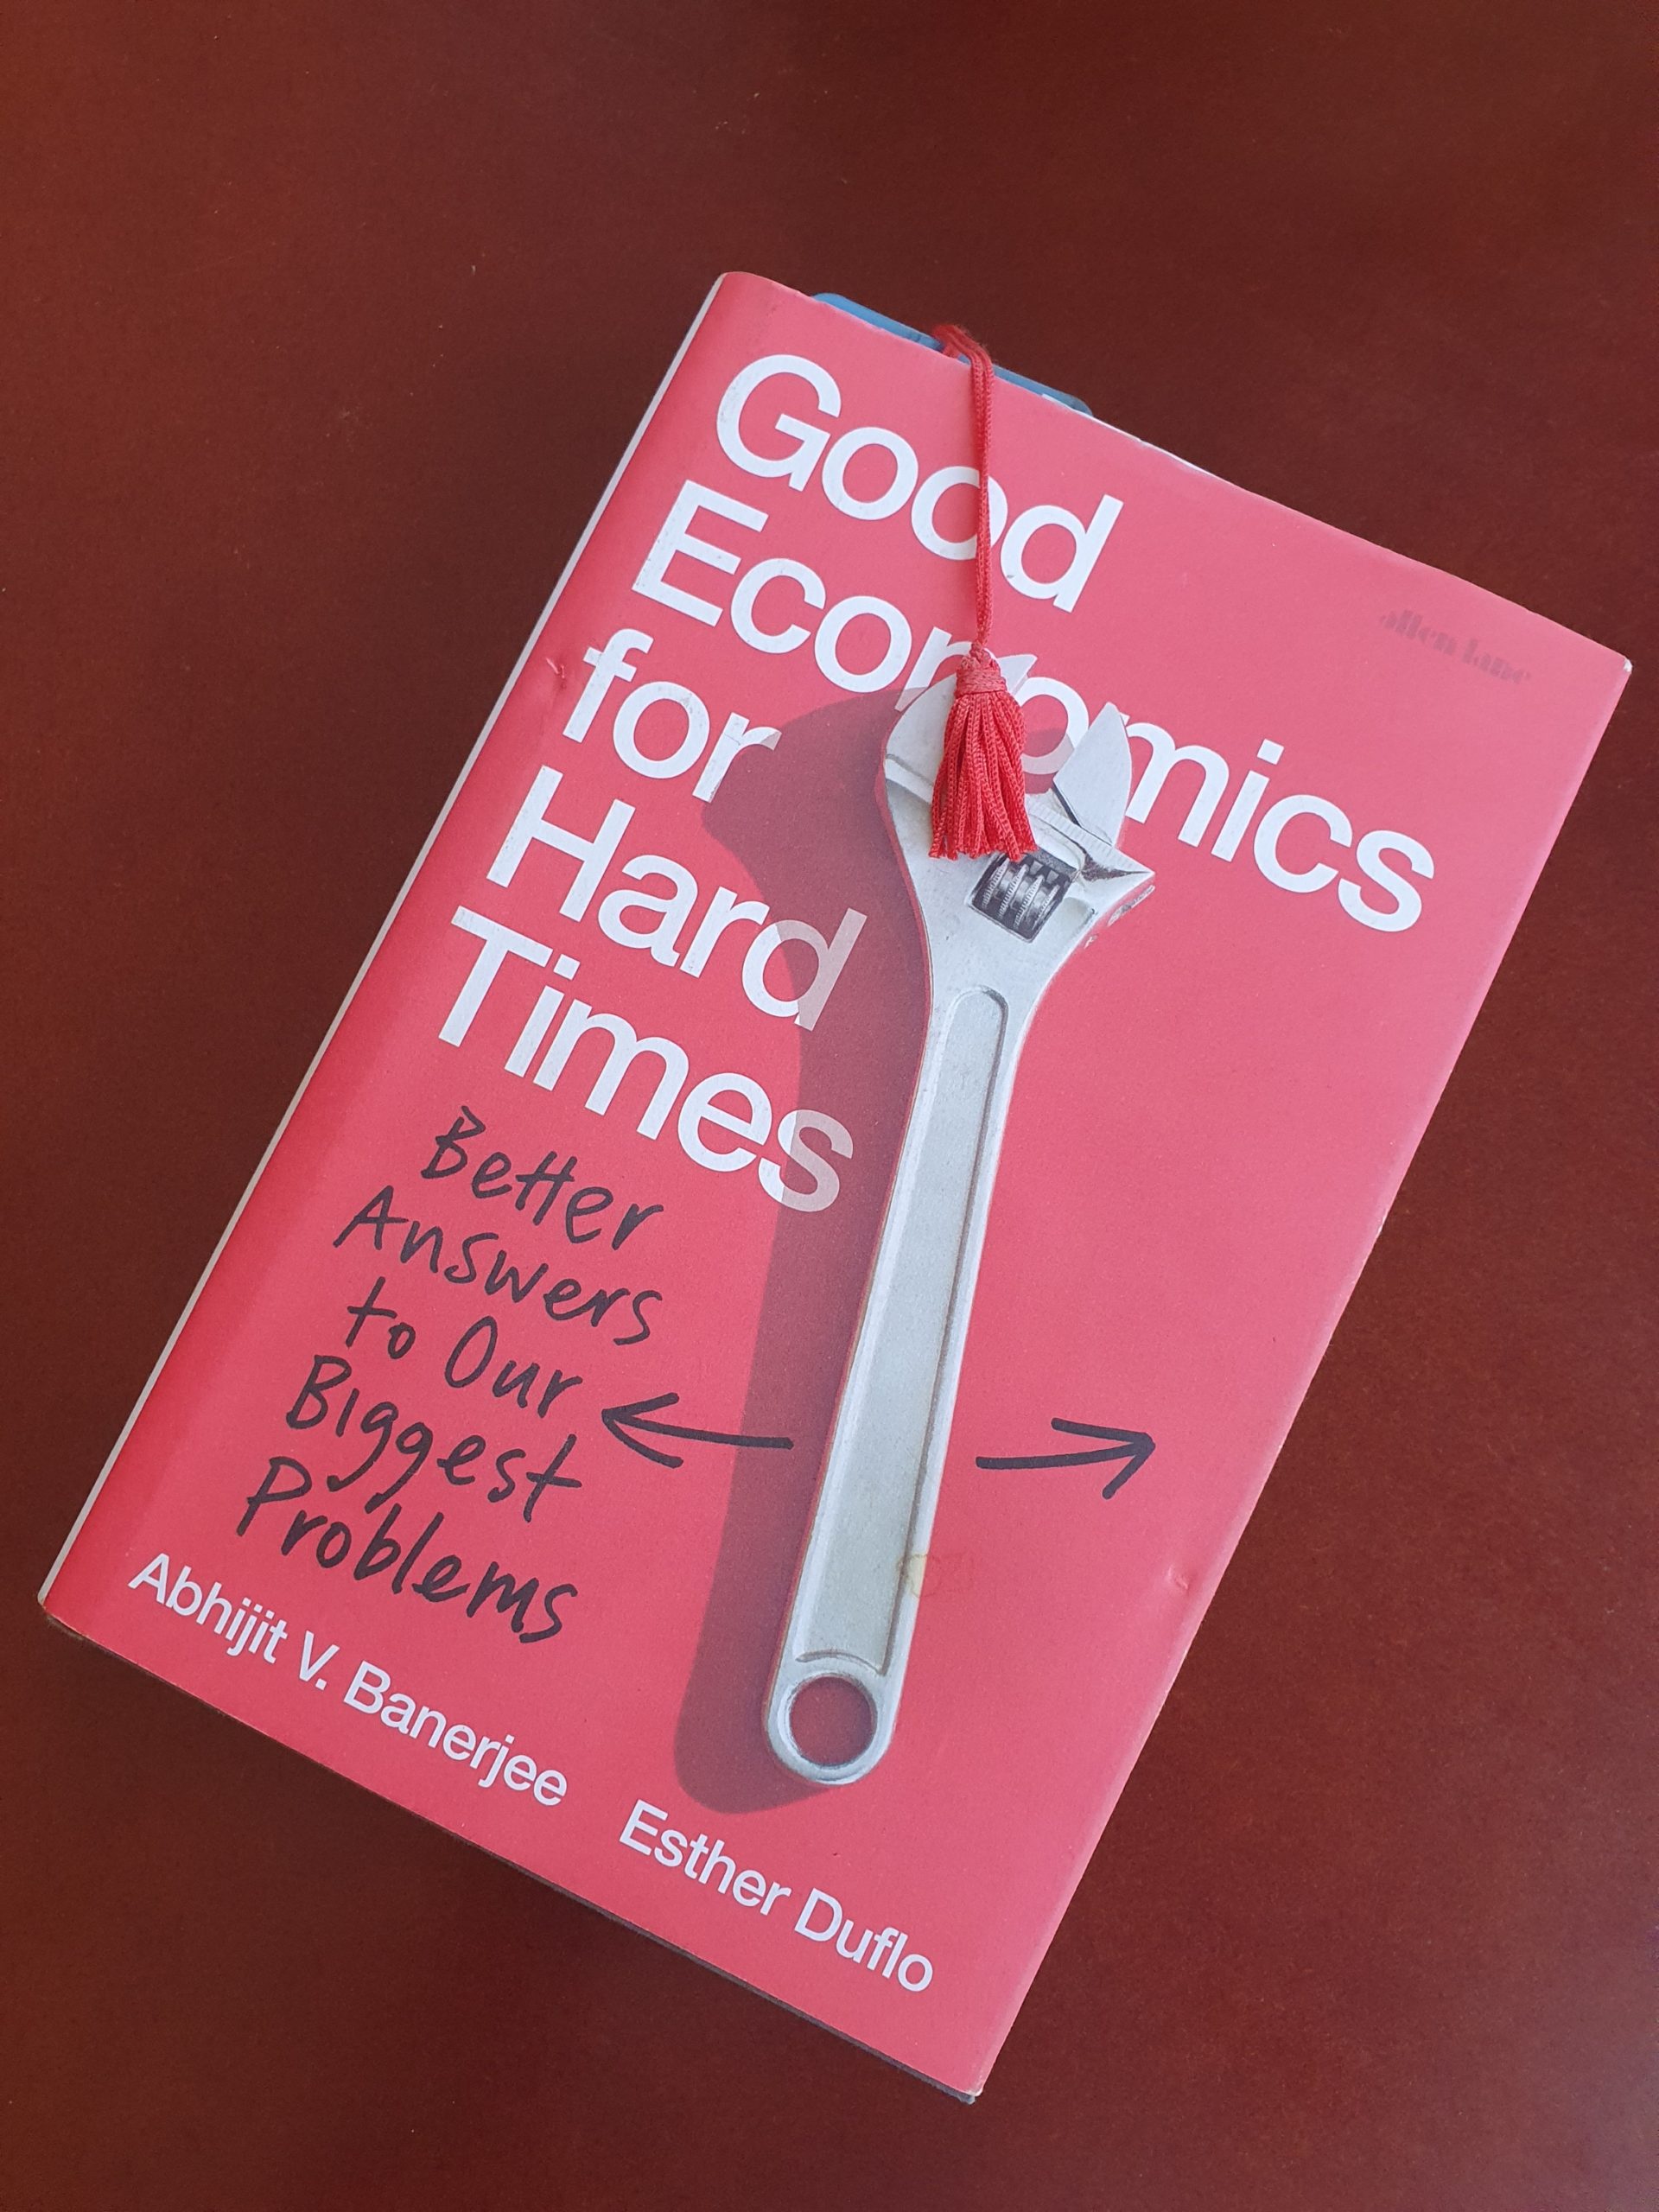 Reading development economics at the time of COVID-19: Good Economics for Hard Times